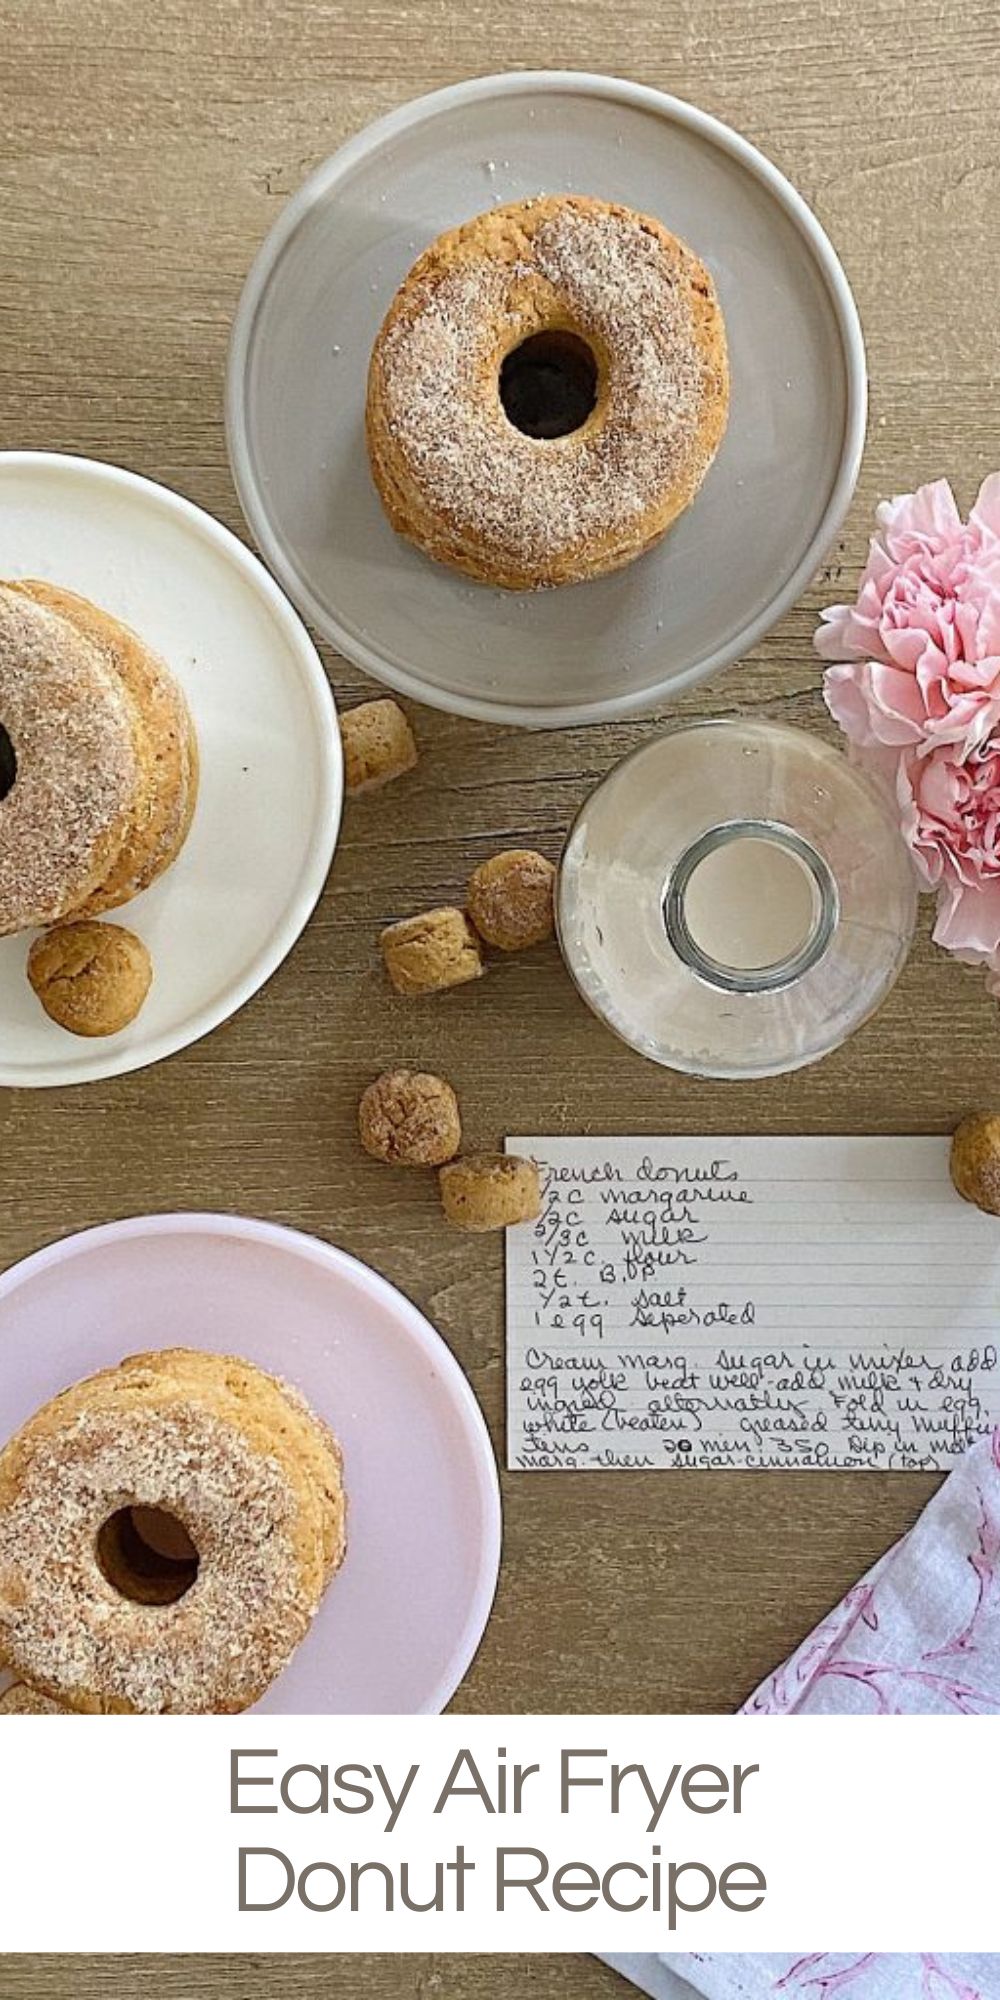 Today I am sharing how I modified my Mom's French Donut recipe into an Easy Air Fryer Donut recipe. And they turned out amazing.